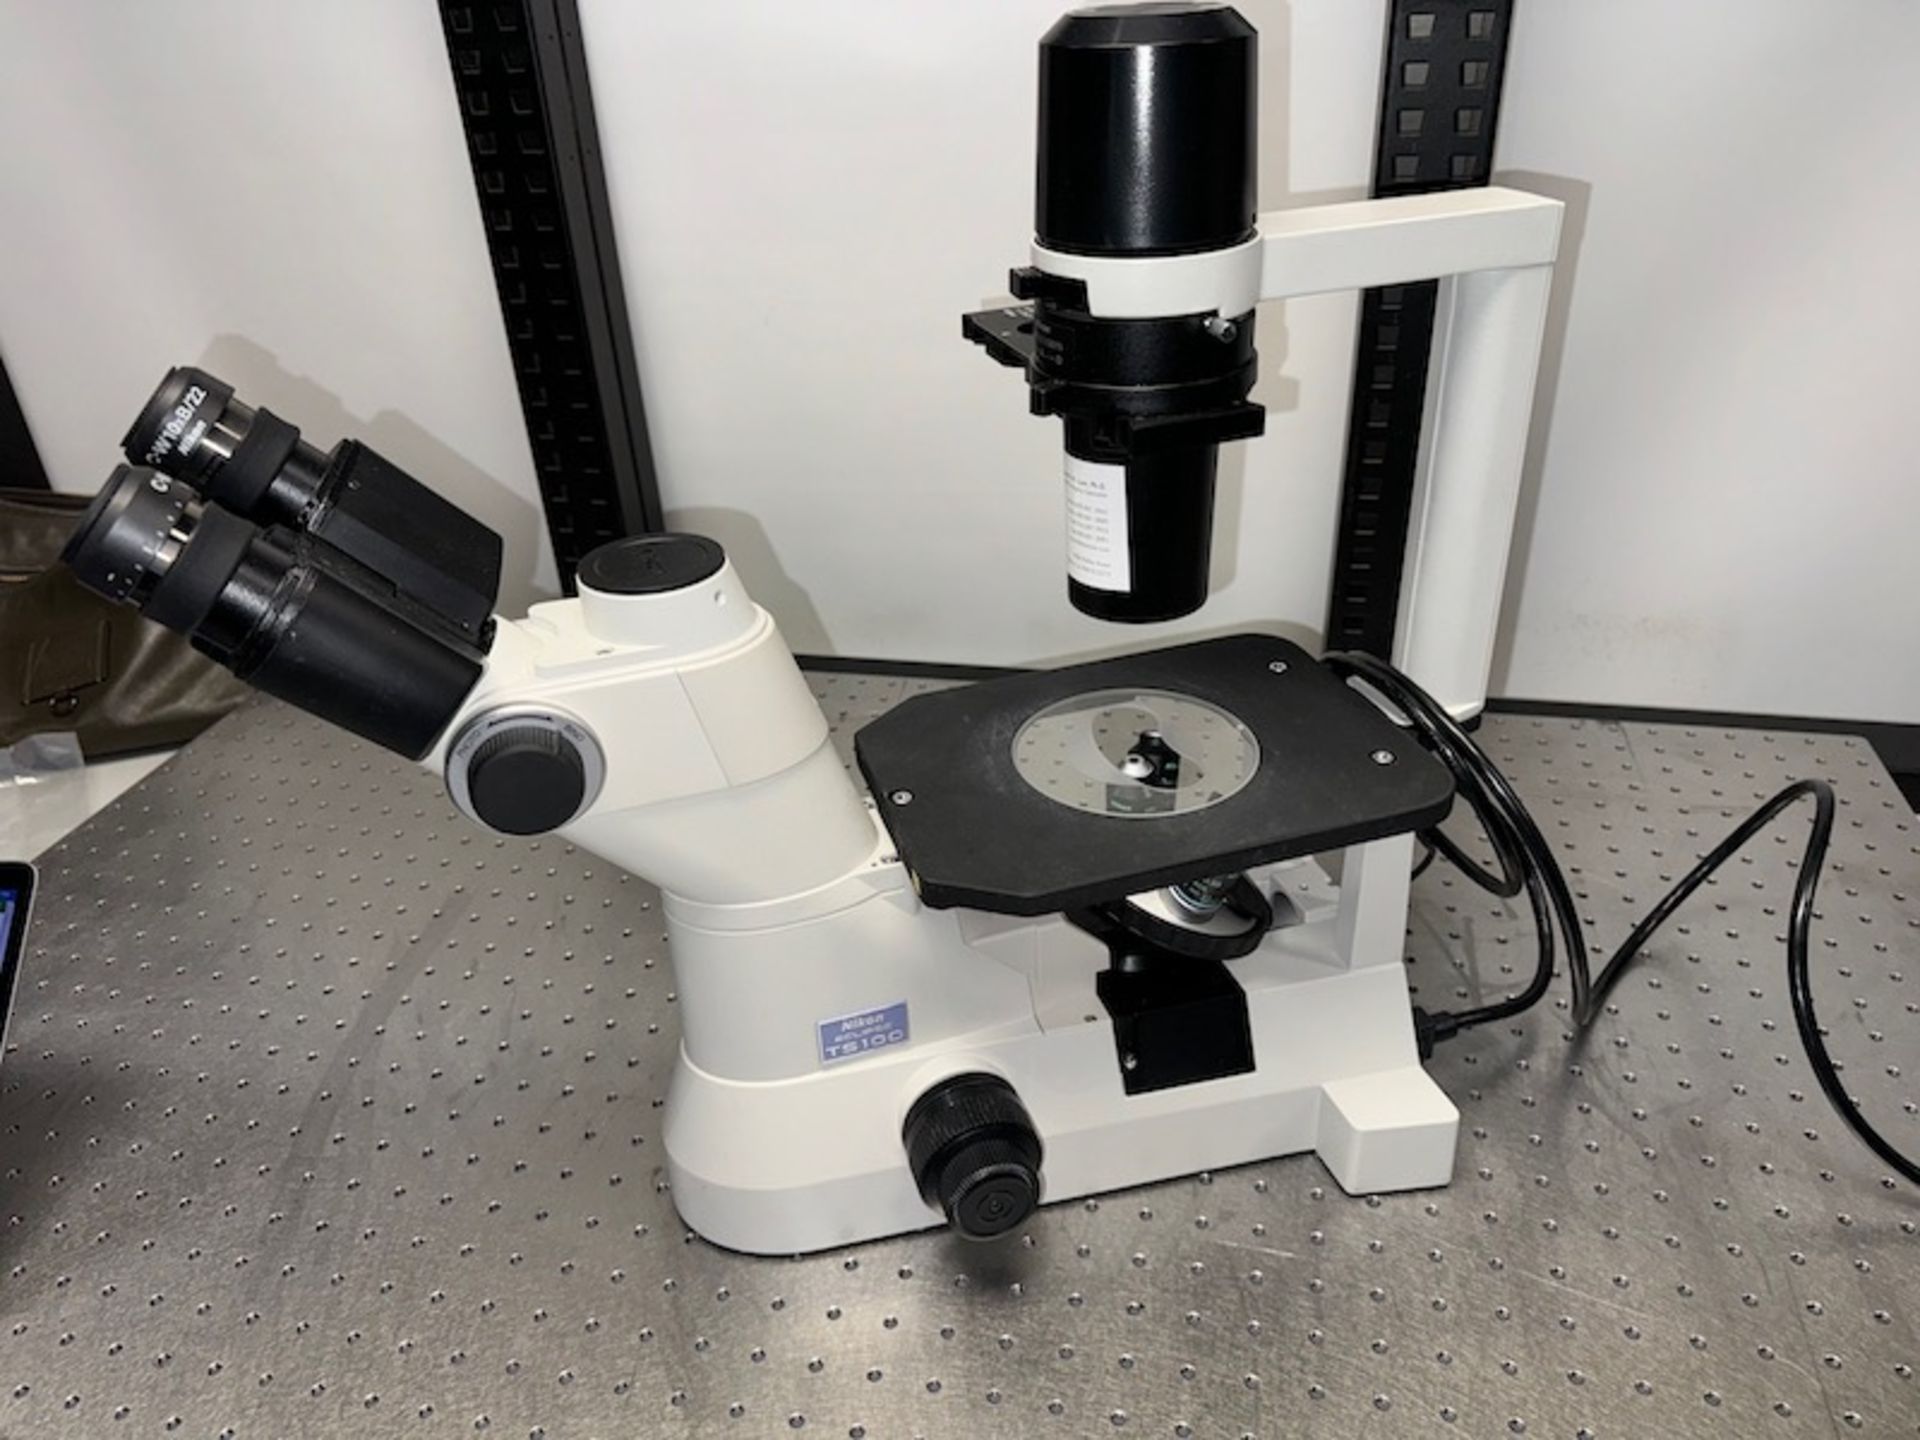 NIKON ECLIPSE INVERTED MICROSCOPE W / EYEPIECES & OBJECTIVE LENS - Image 14 of 14